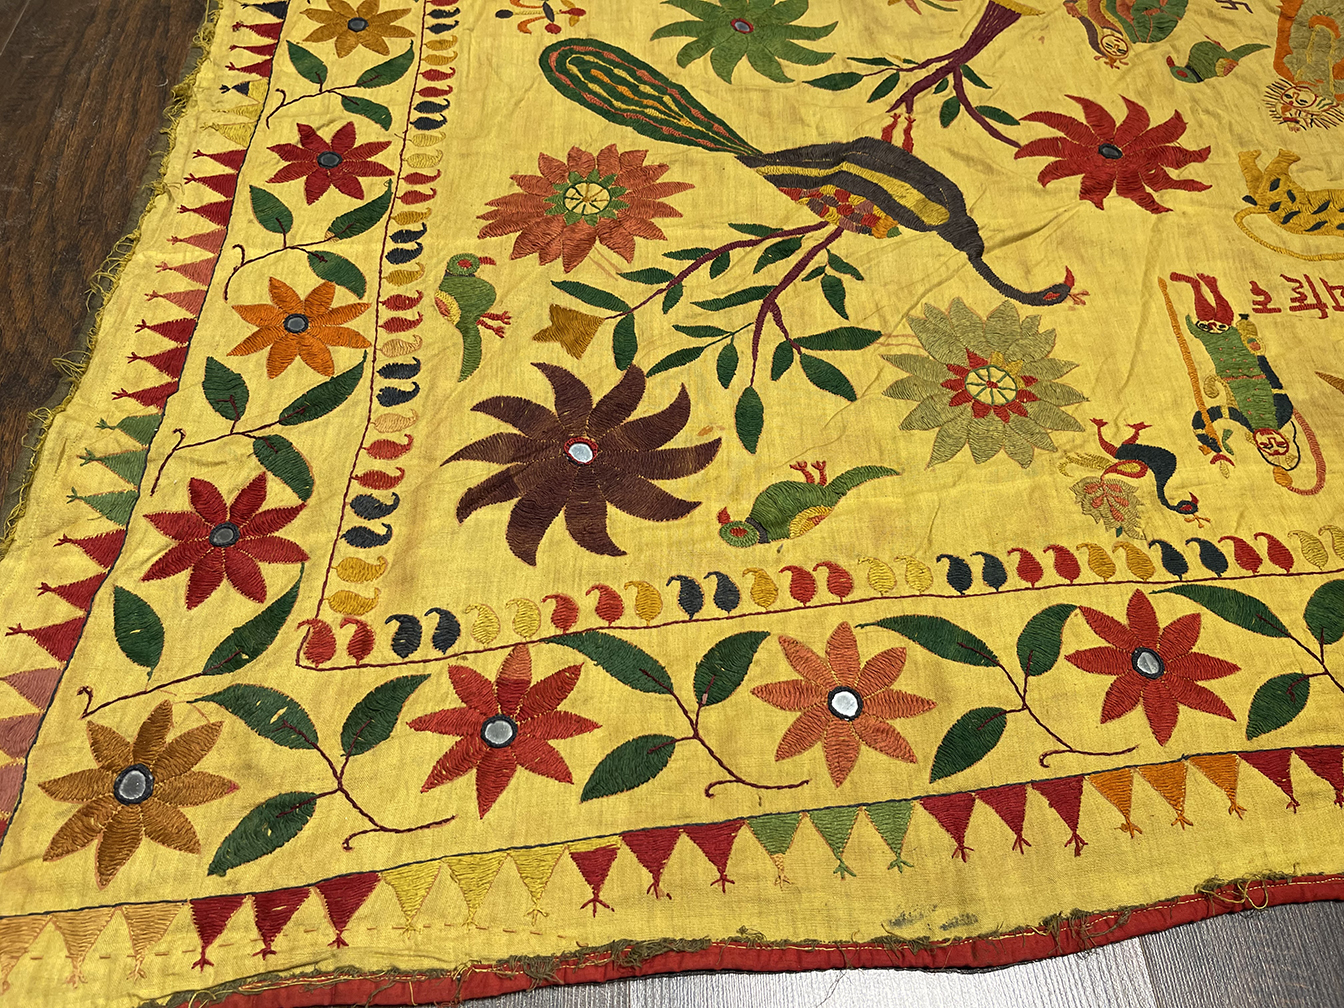 Antique embroidery Rug - # 56517